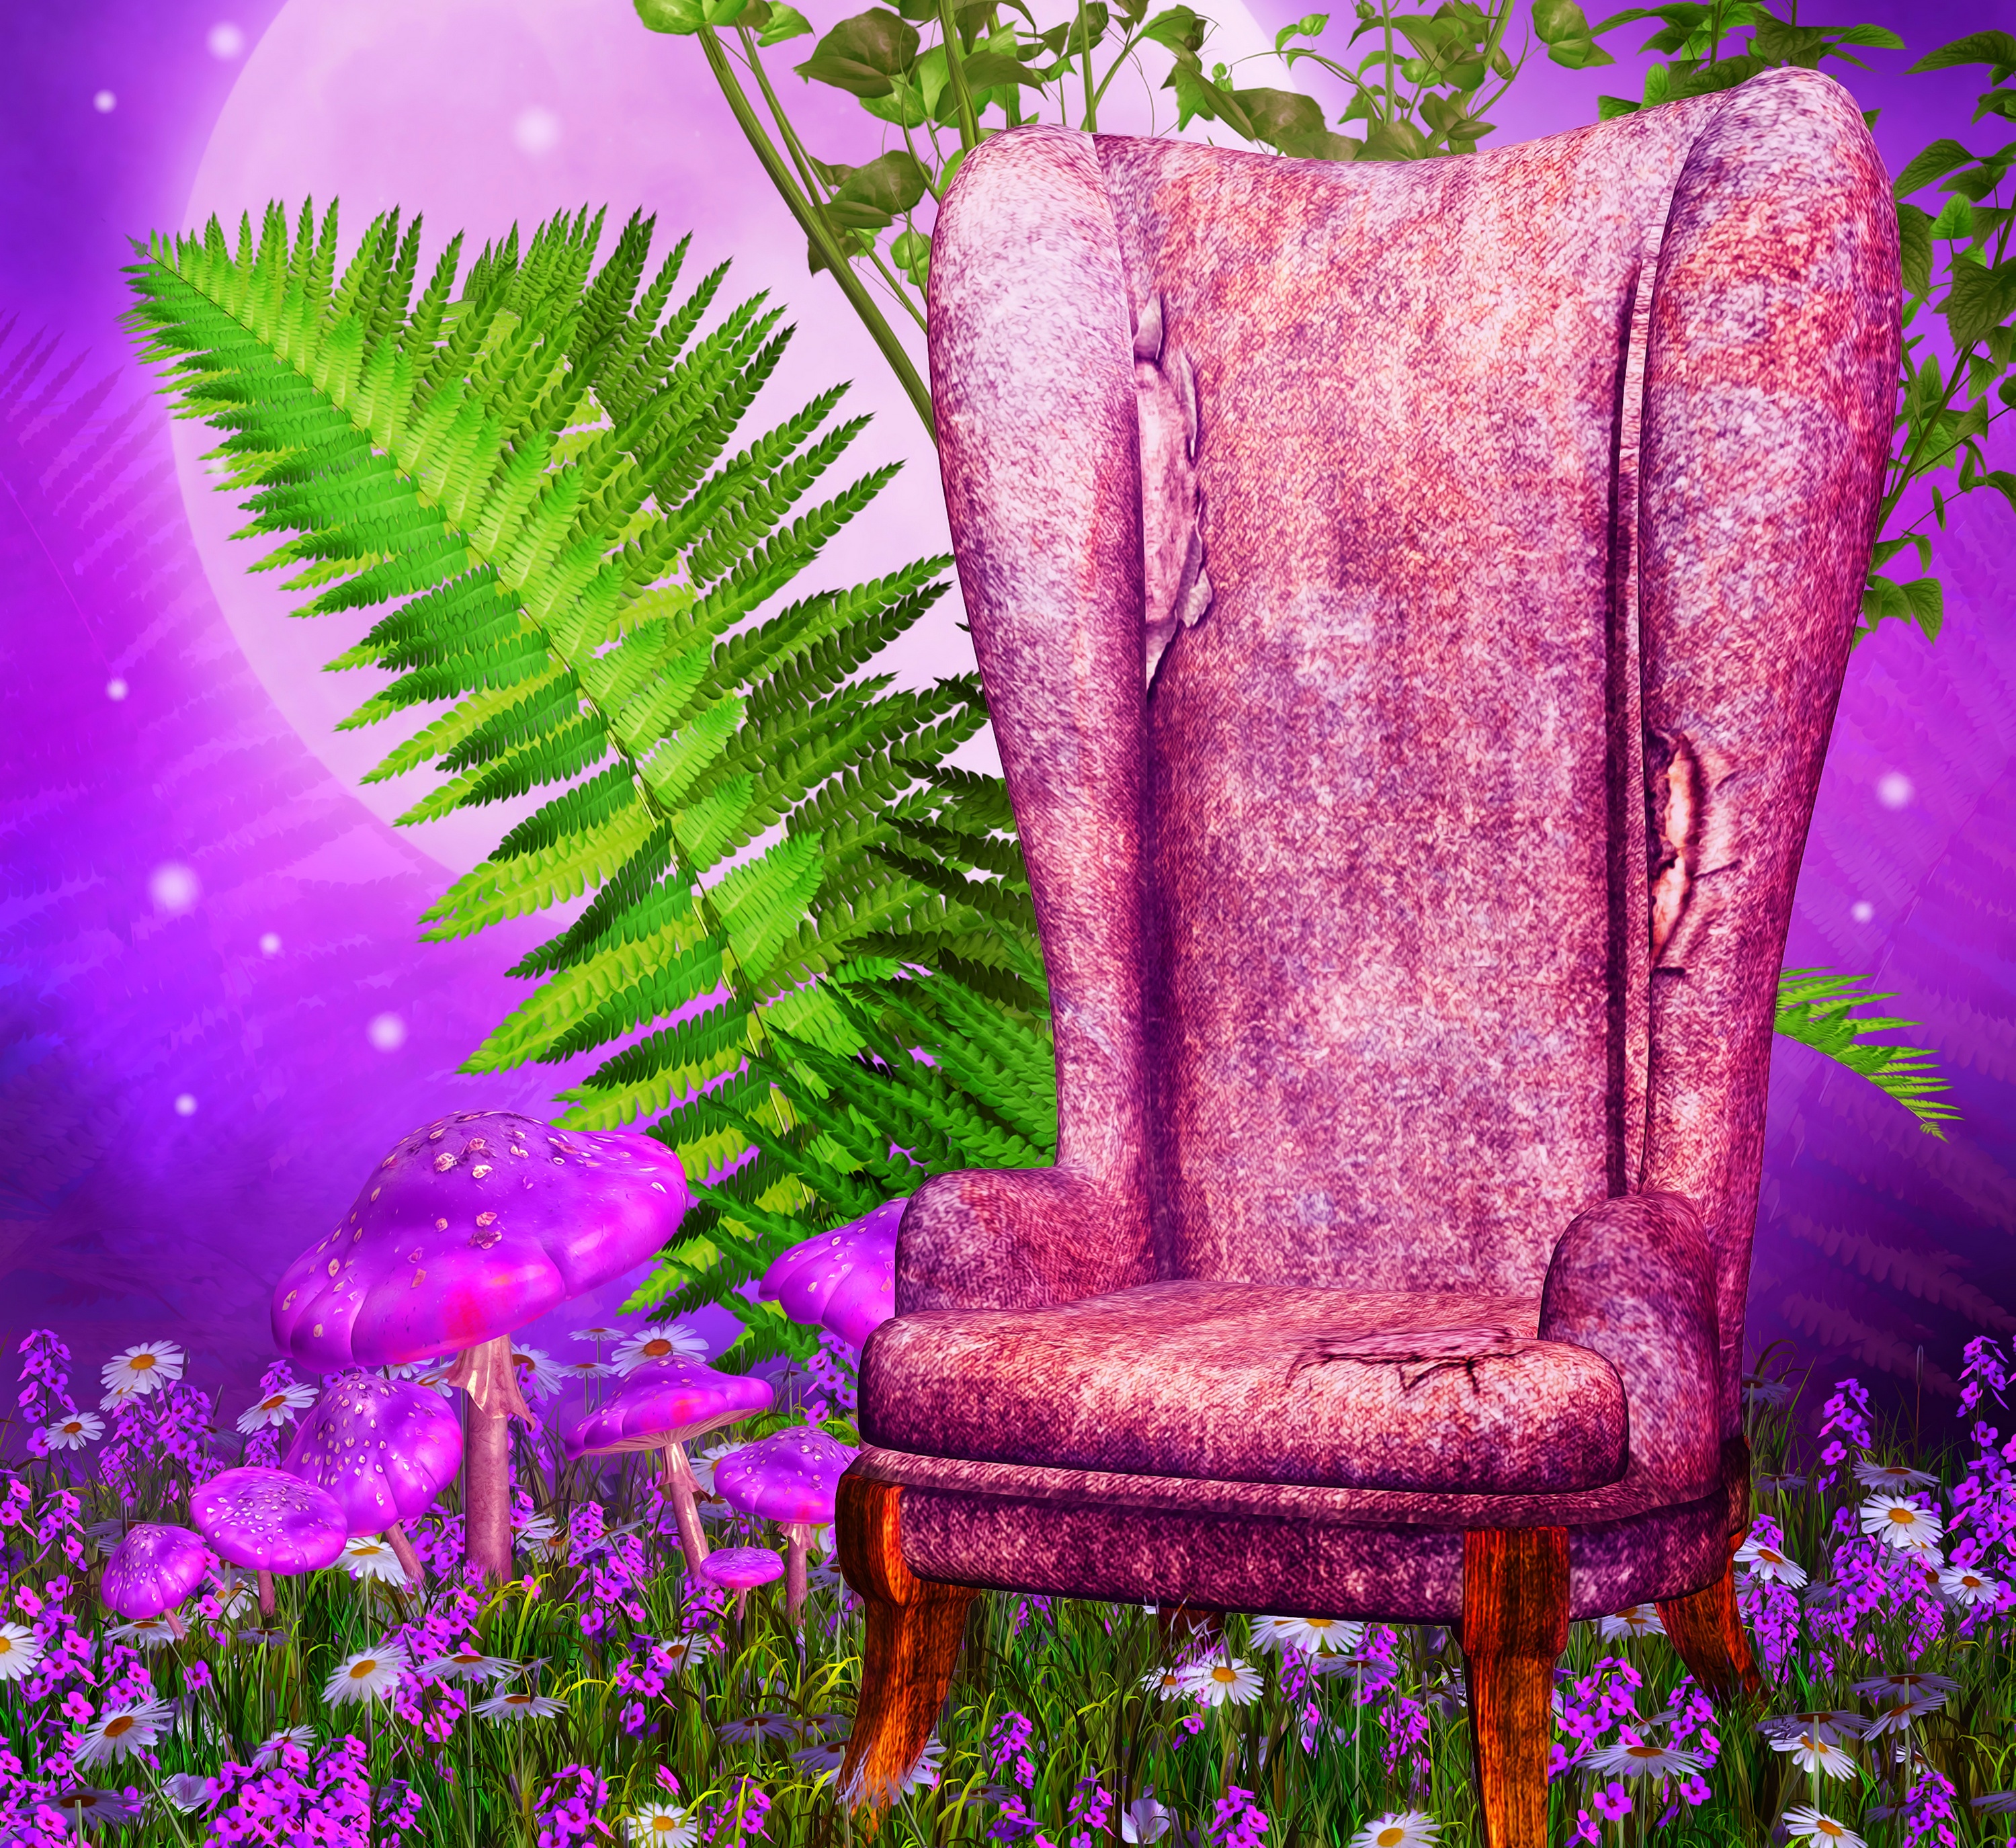 Chair in Enchanted Forest